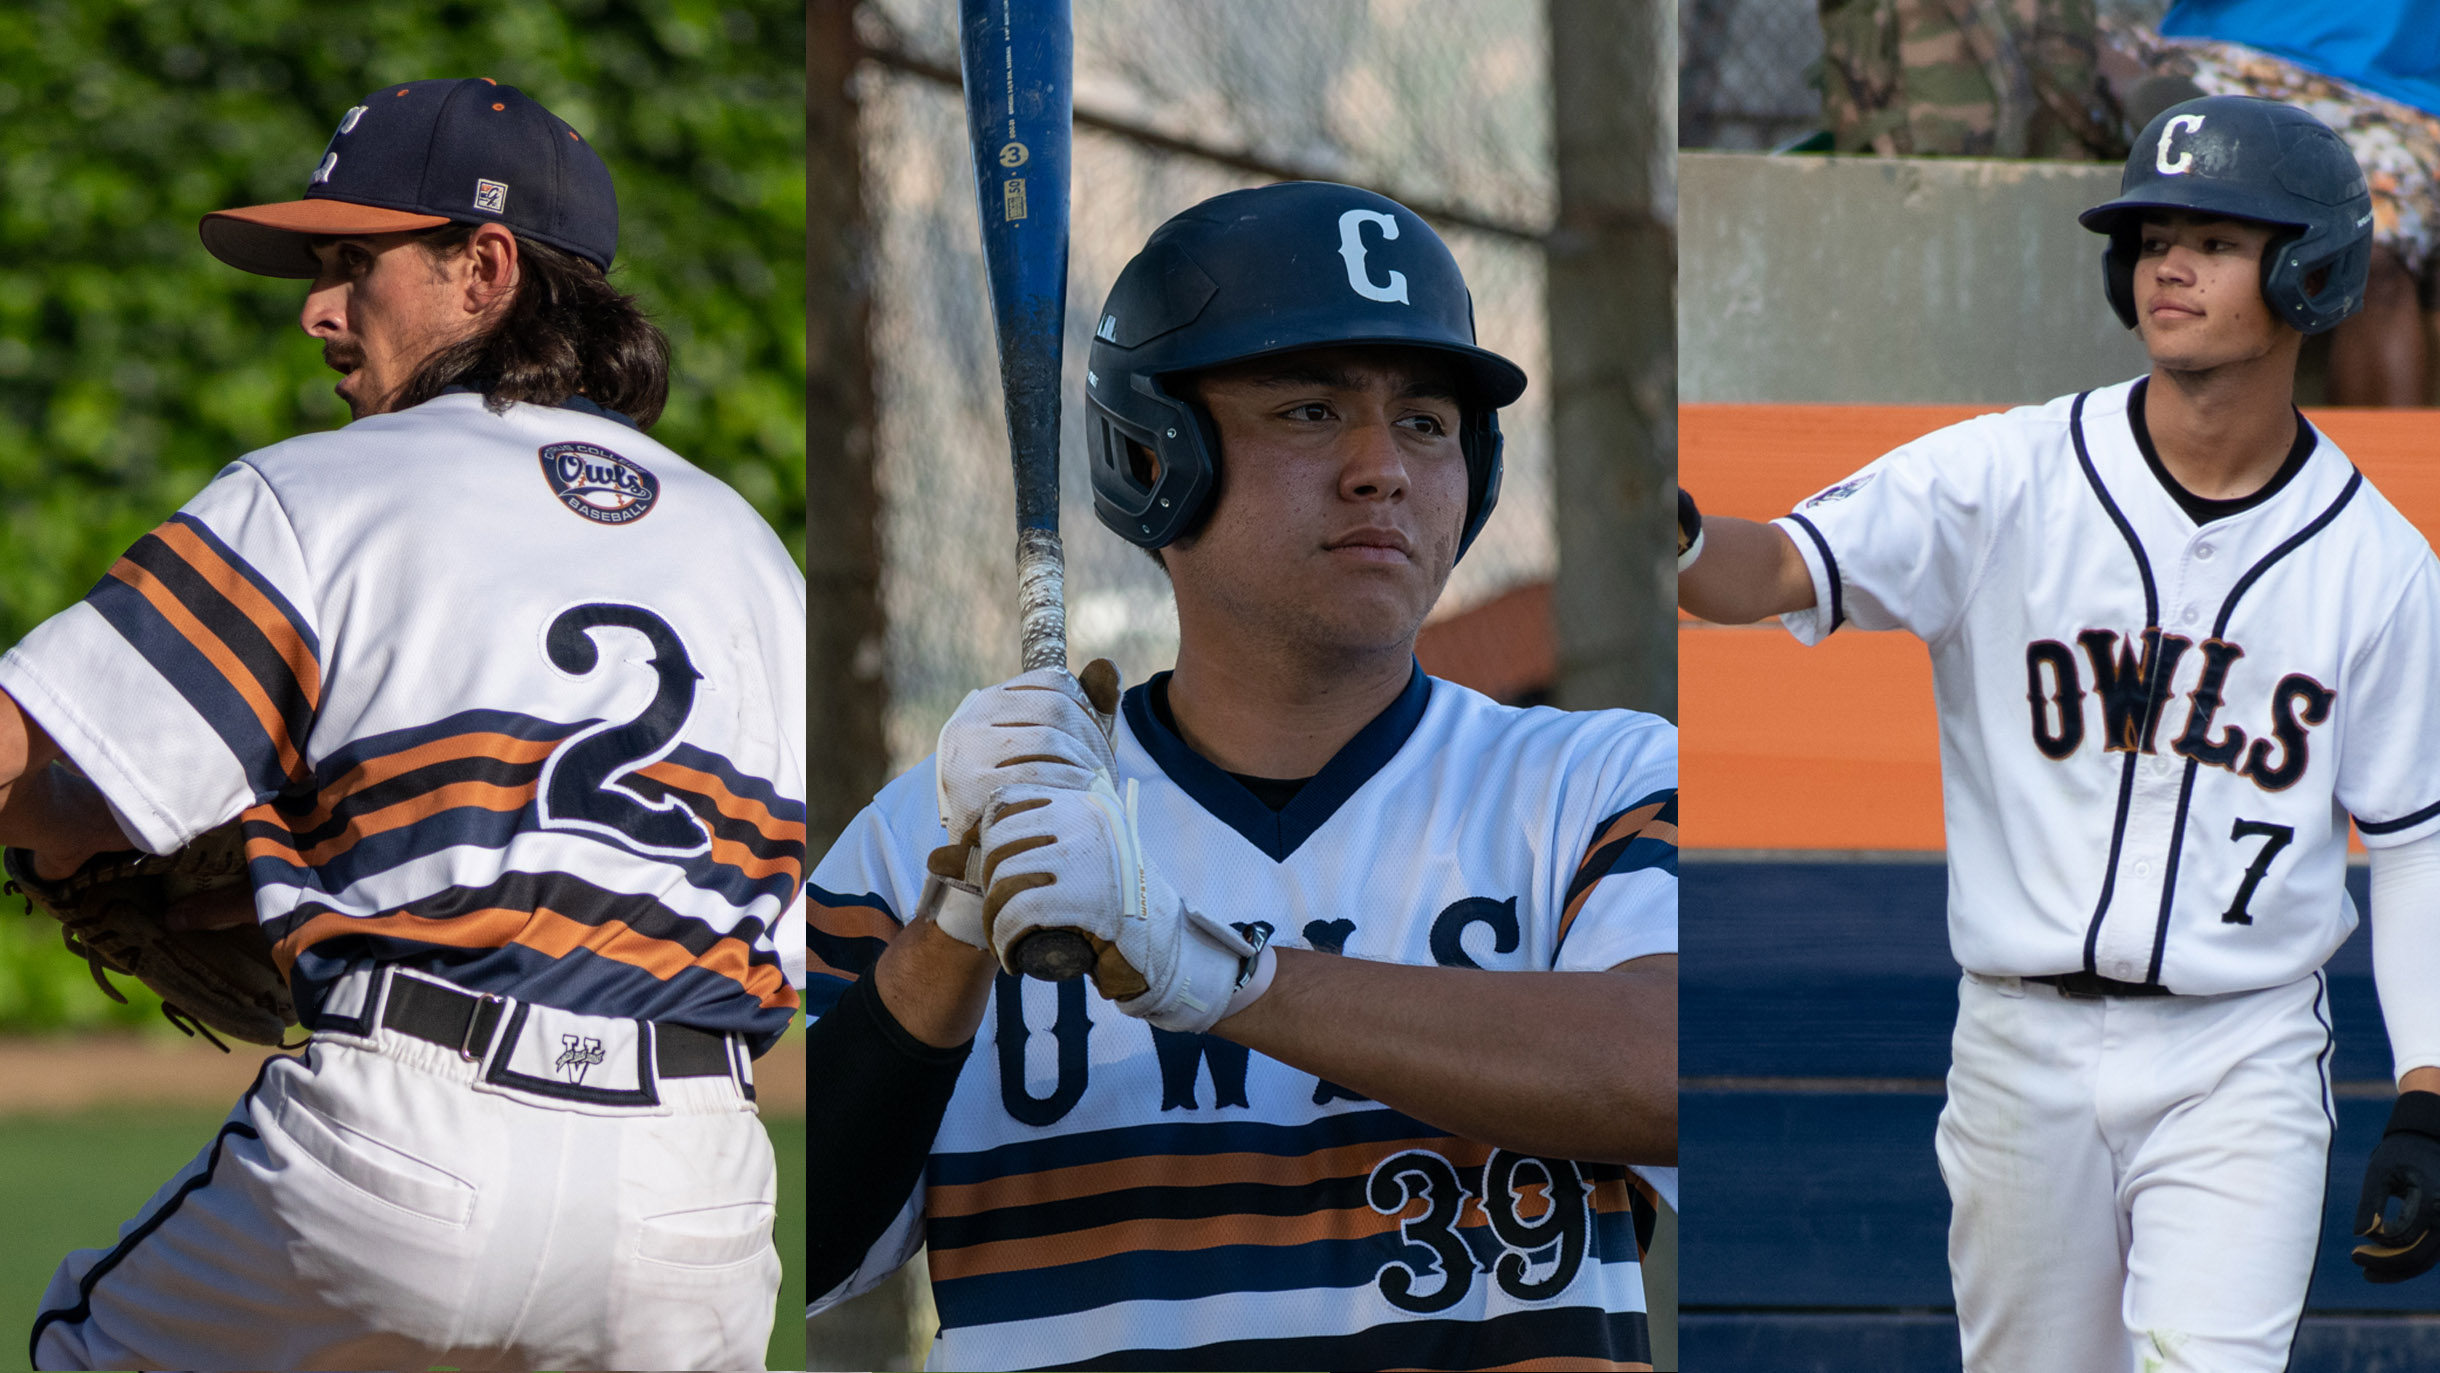 Ryan Luiz Harney, Conner McKinney, and Devon Diaz were each named to the All-Western State Conference second team. Photos by Jacob Bramley